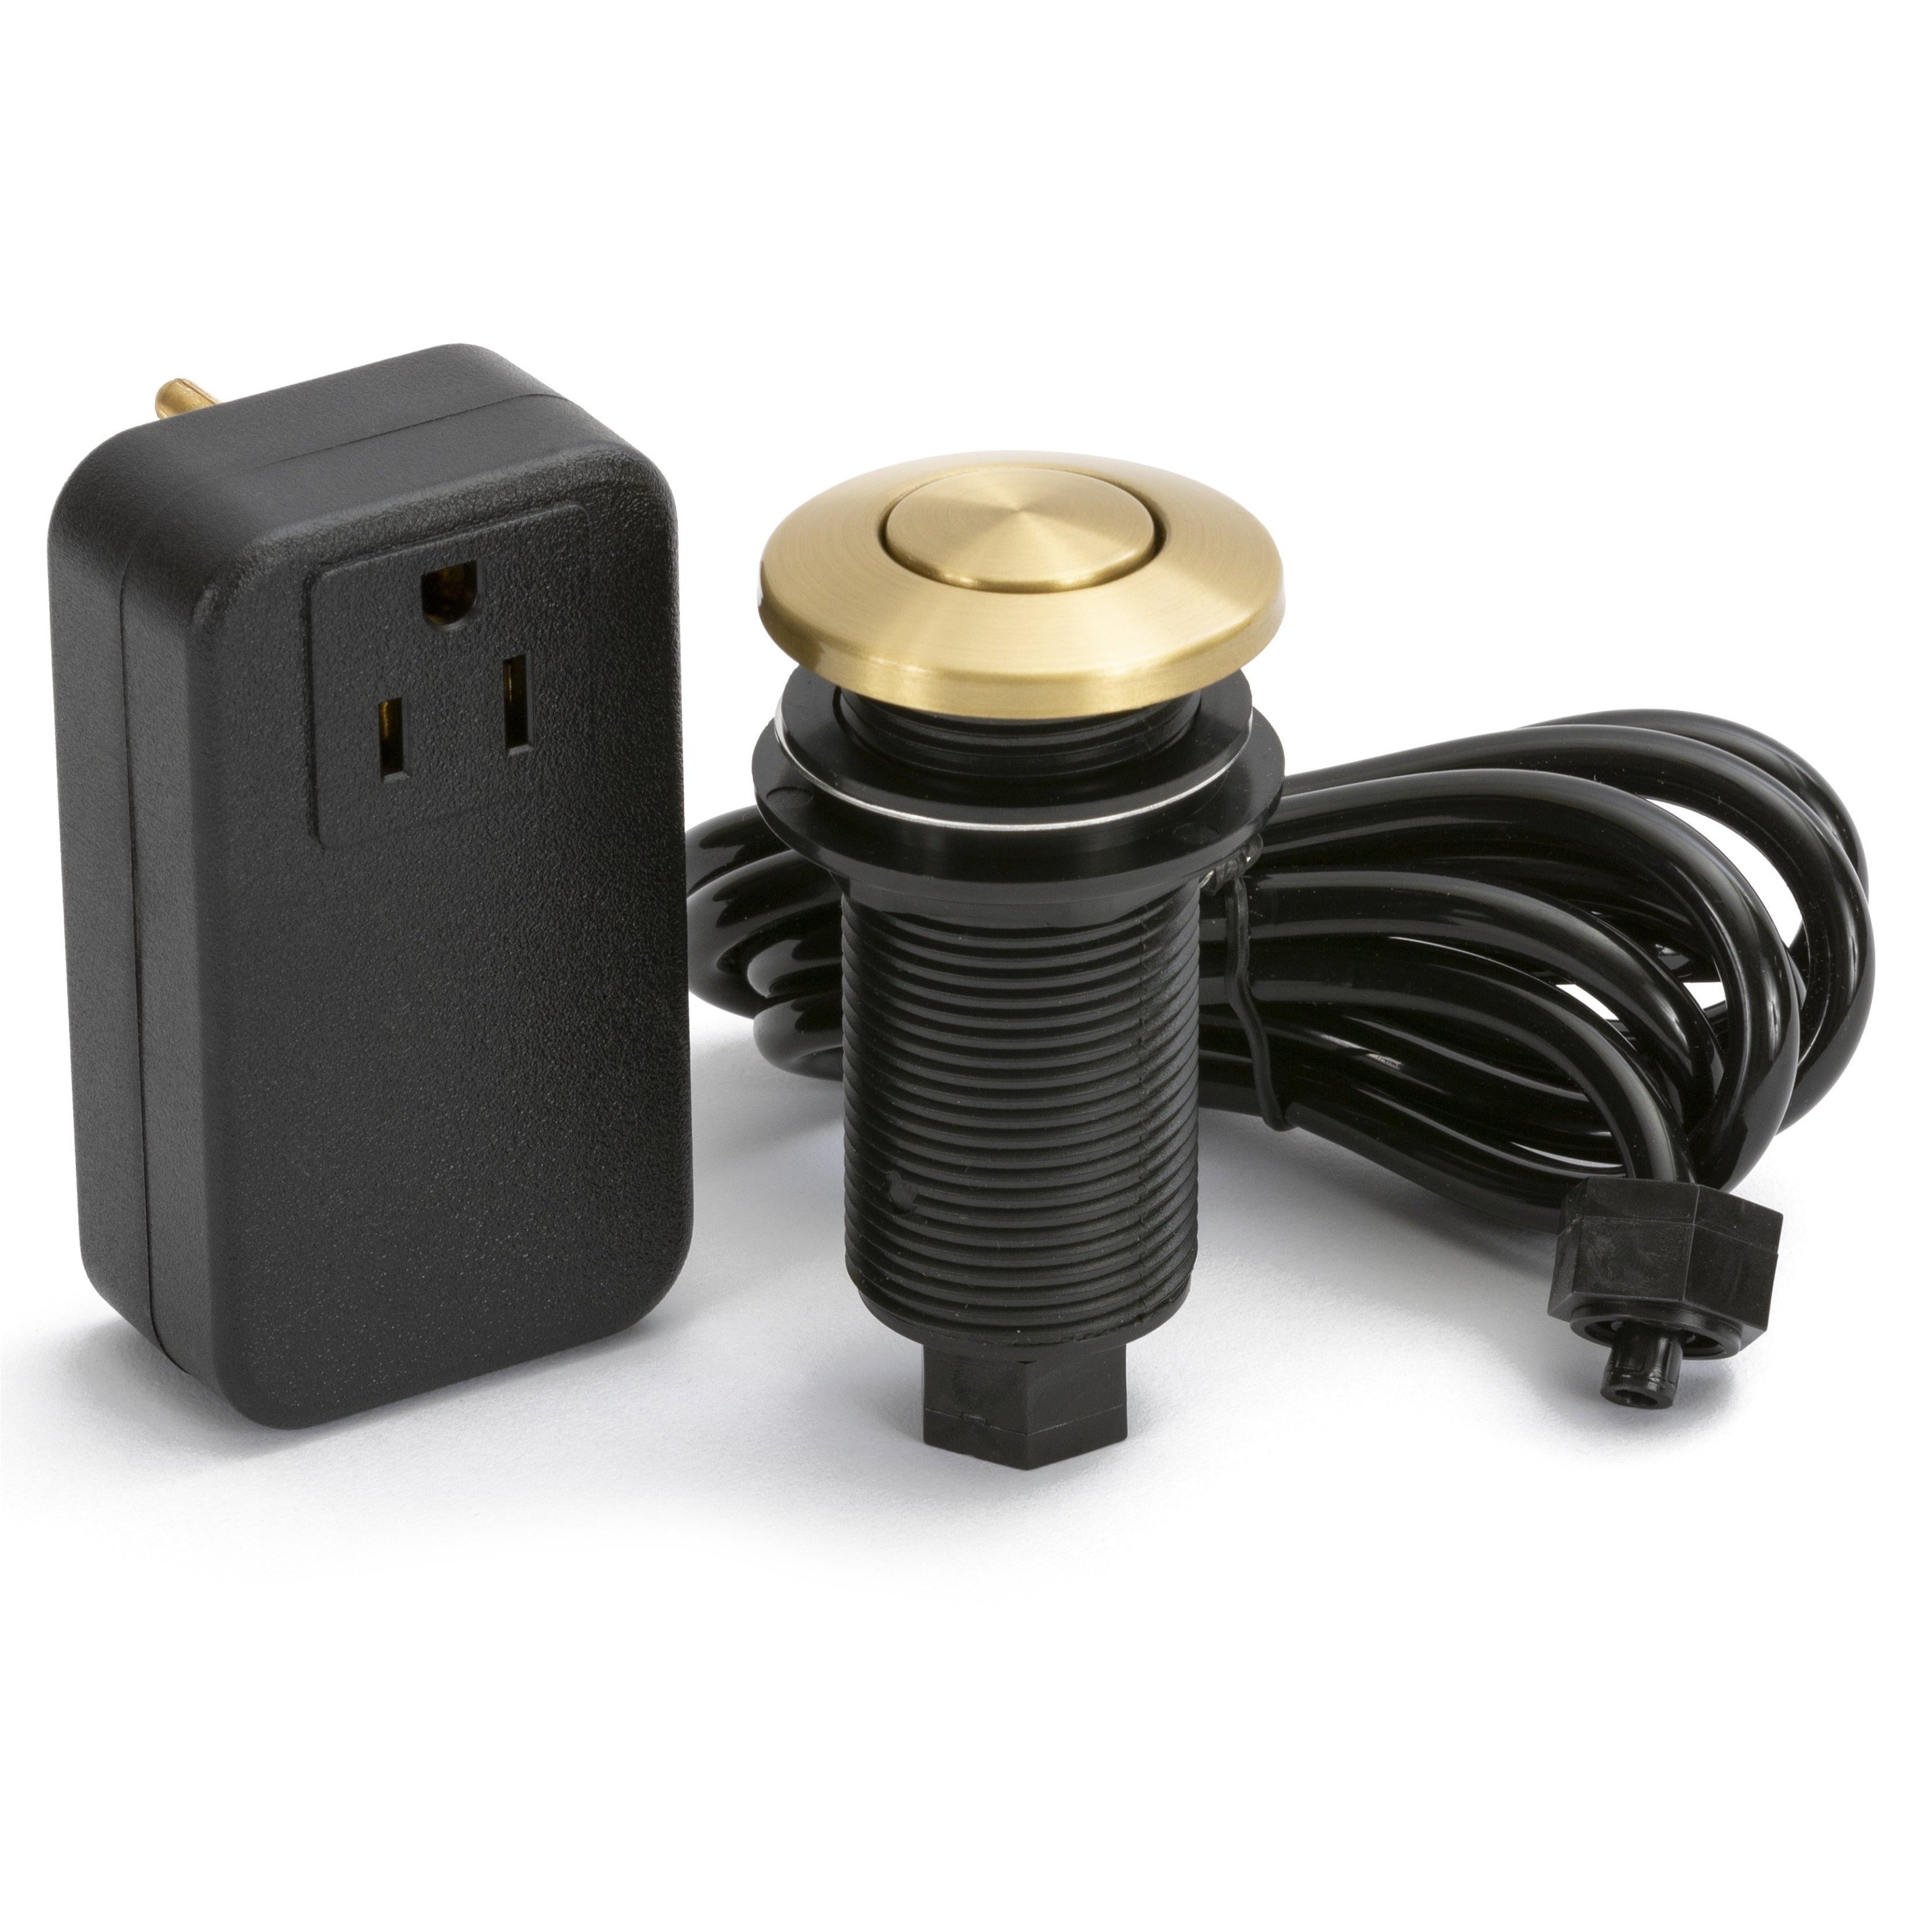 Push Button Garbage Disposal Air Switch and Controller, Brass – Kitchen  Power Pop Ups